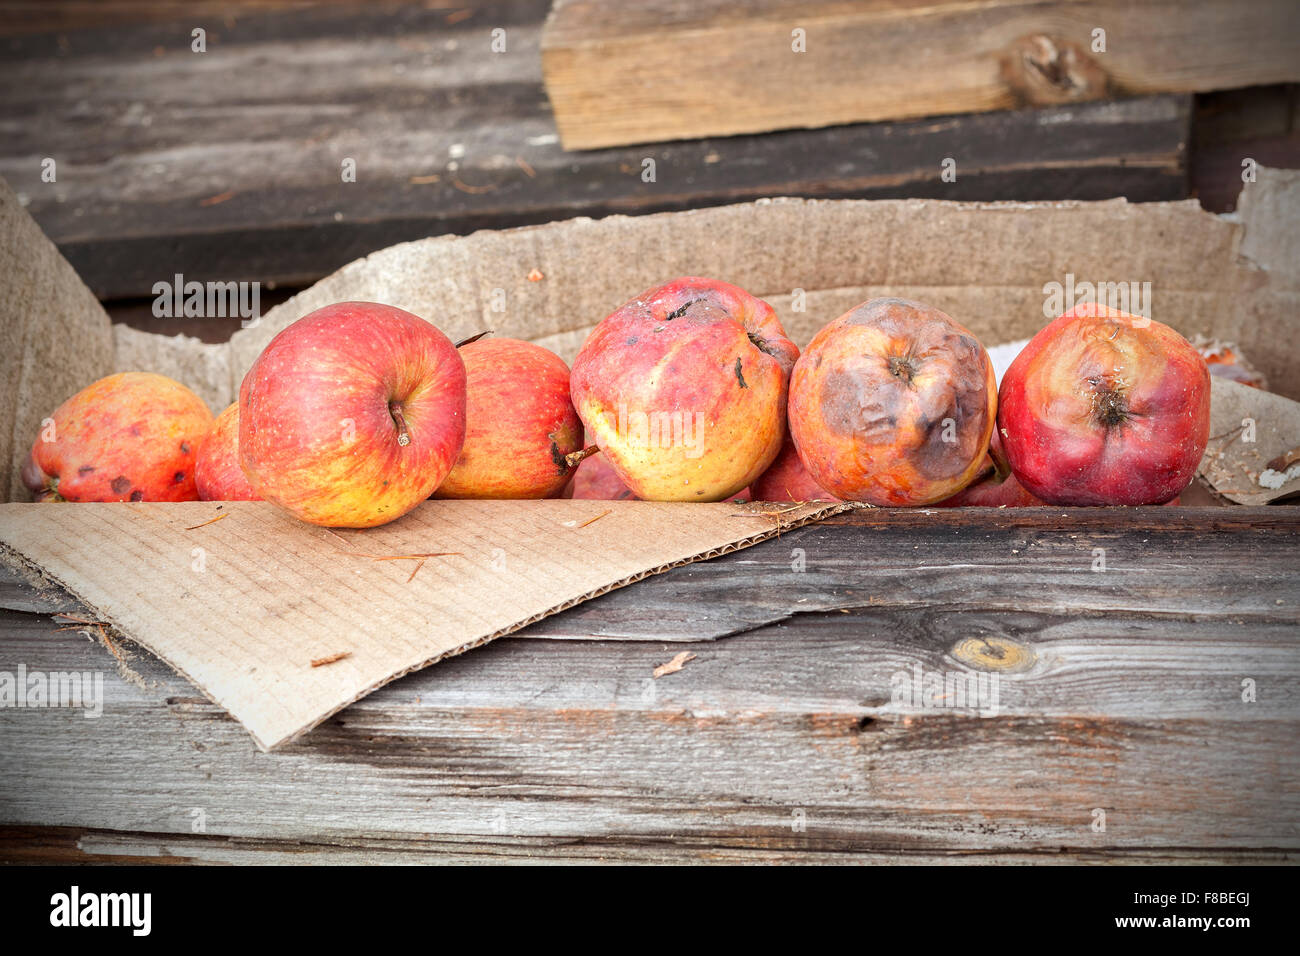 Rotten apples in carton on wooden boards. Stock Photo